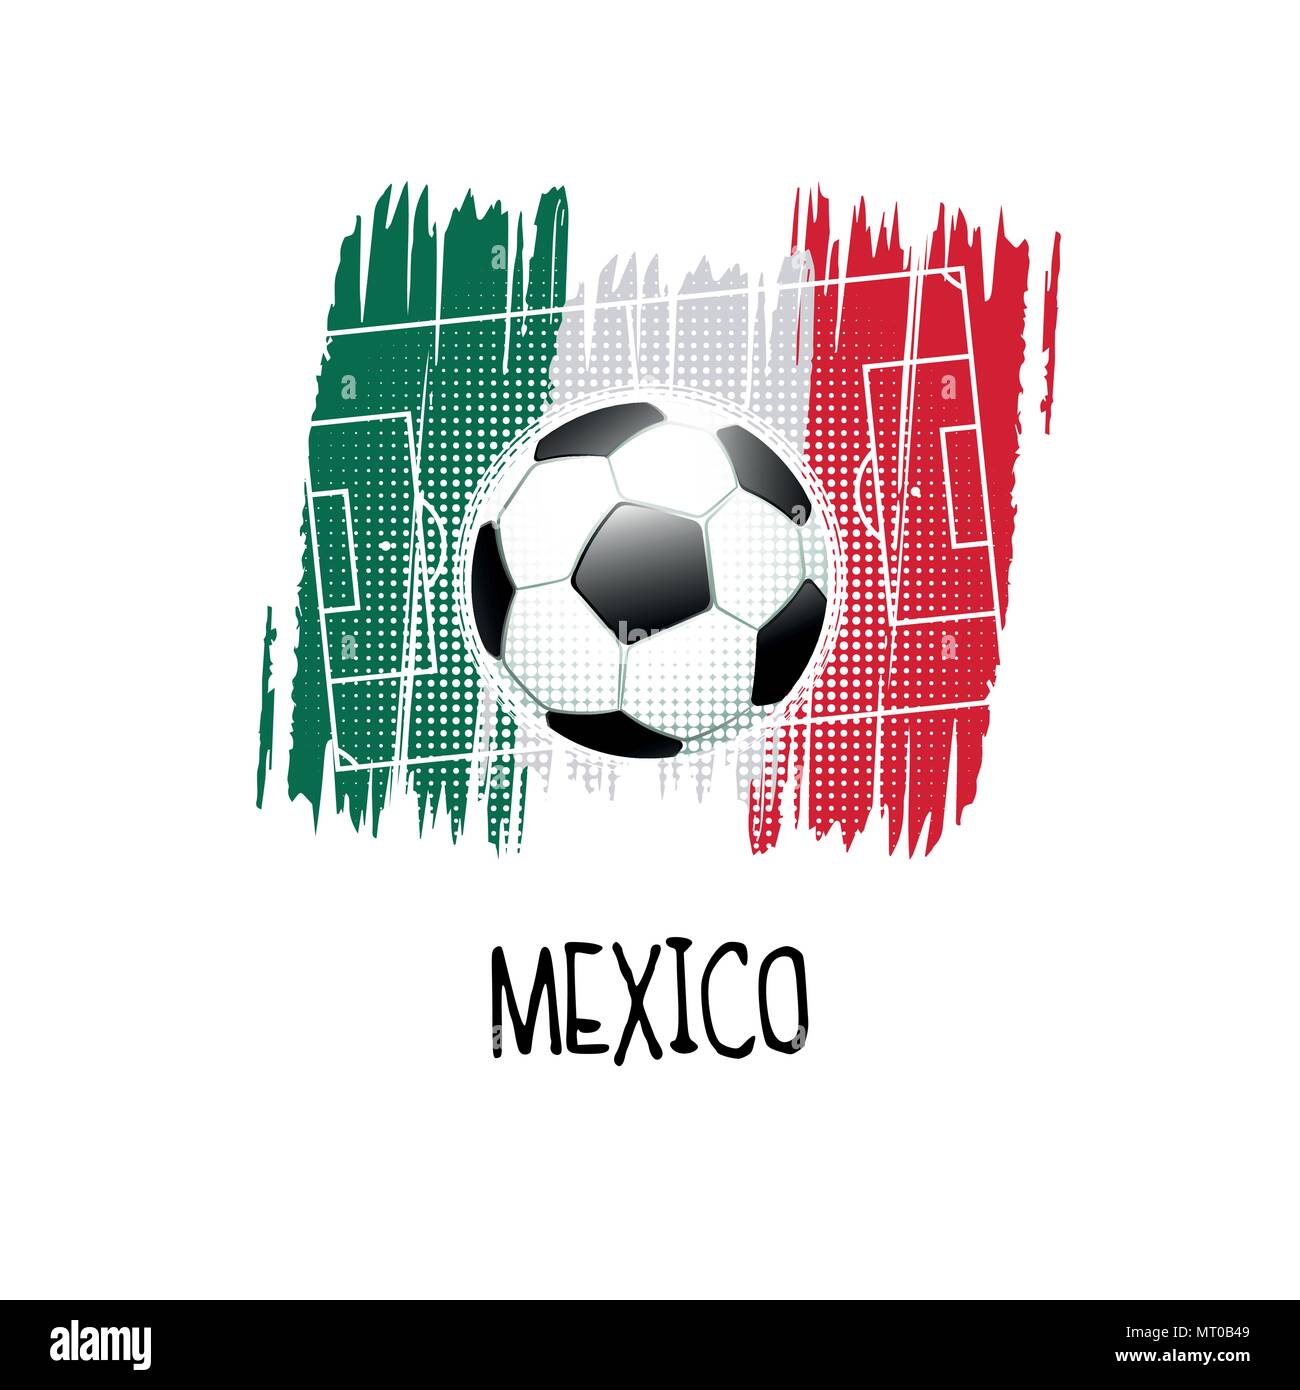 Hand written word 'Mexico' with soccer ball, soccer field and abstract colors of the Mexican flag. Vector illustration. Stock Vector